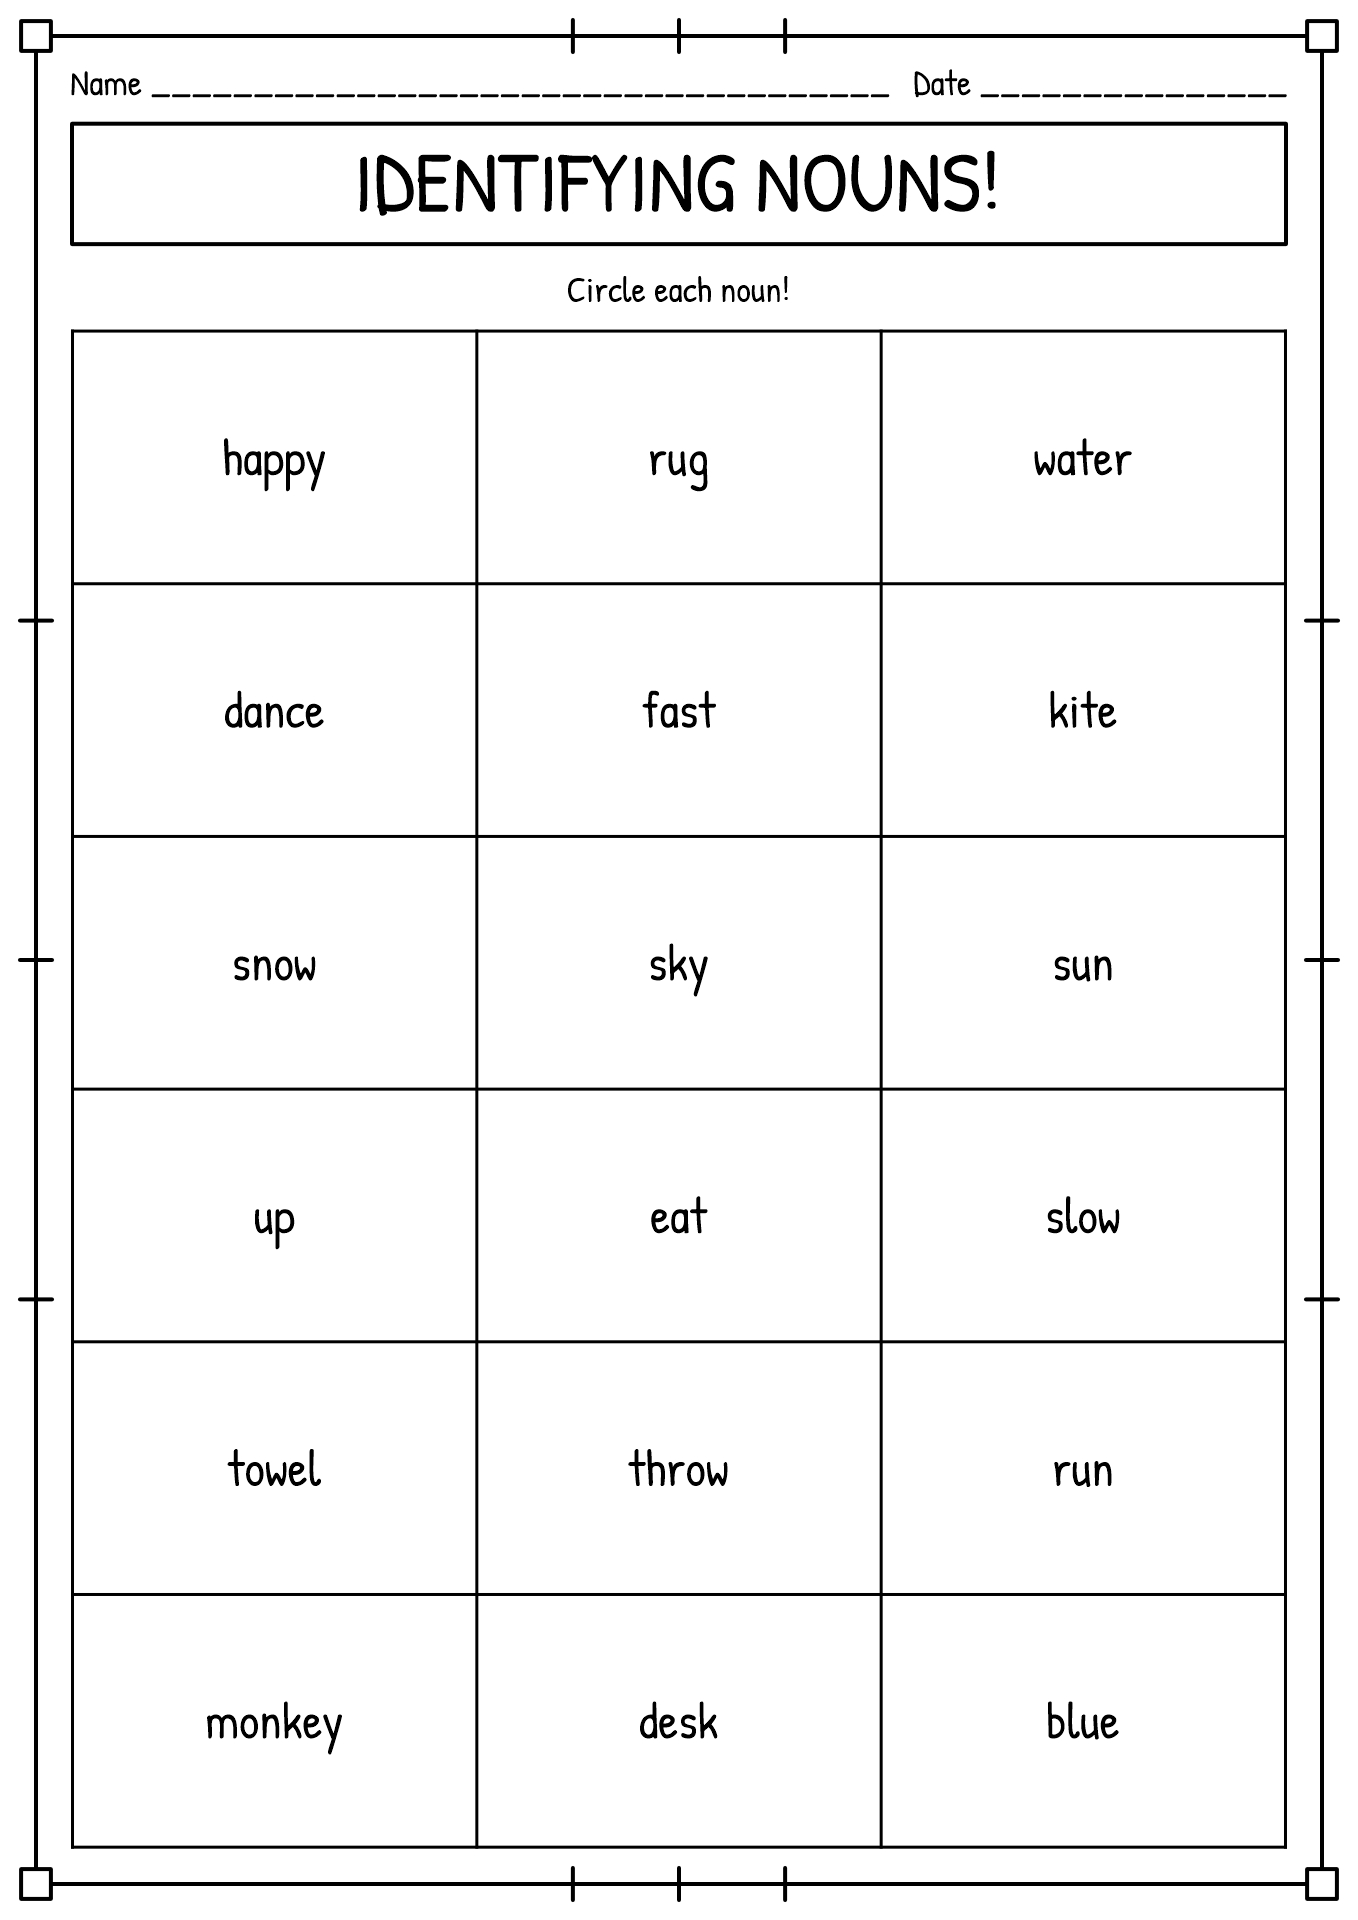 17-best-images-of-different-kinds-of-nouns-worksheet-different-types